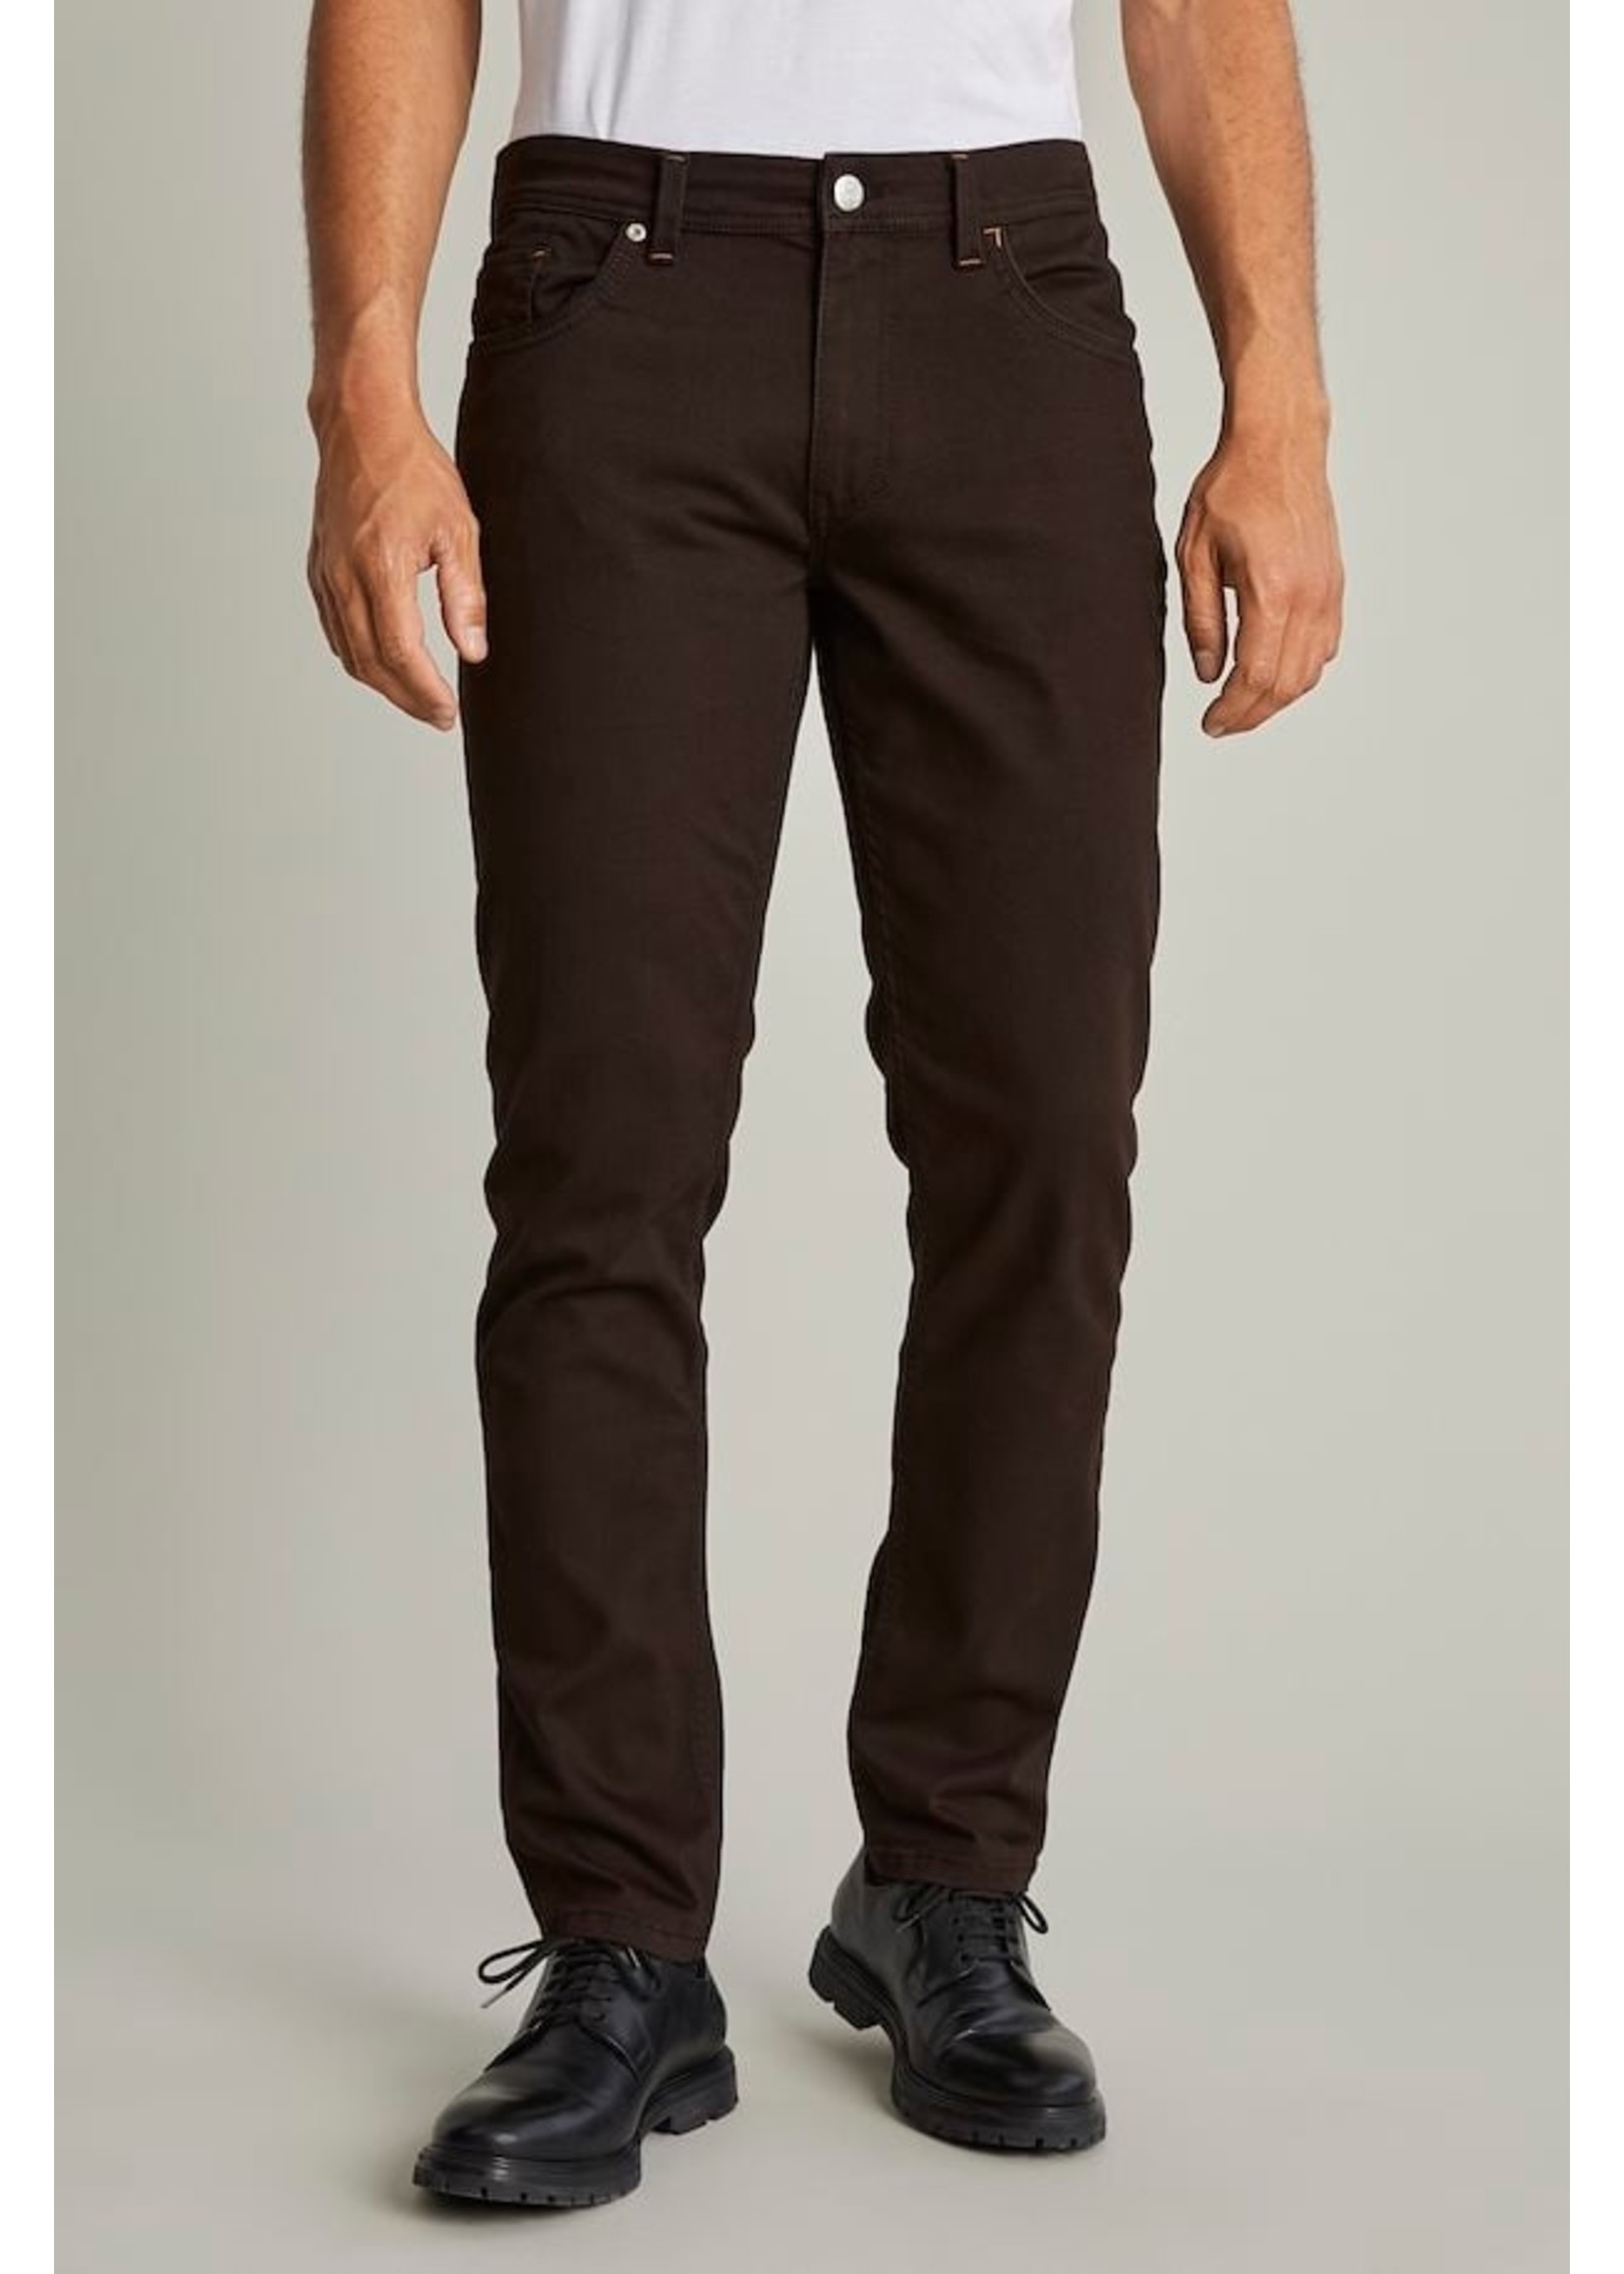 Matinique MApete Pant 30205683 Brown